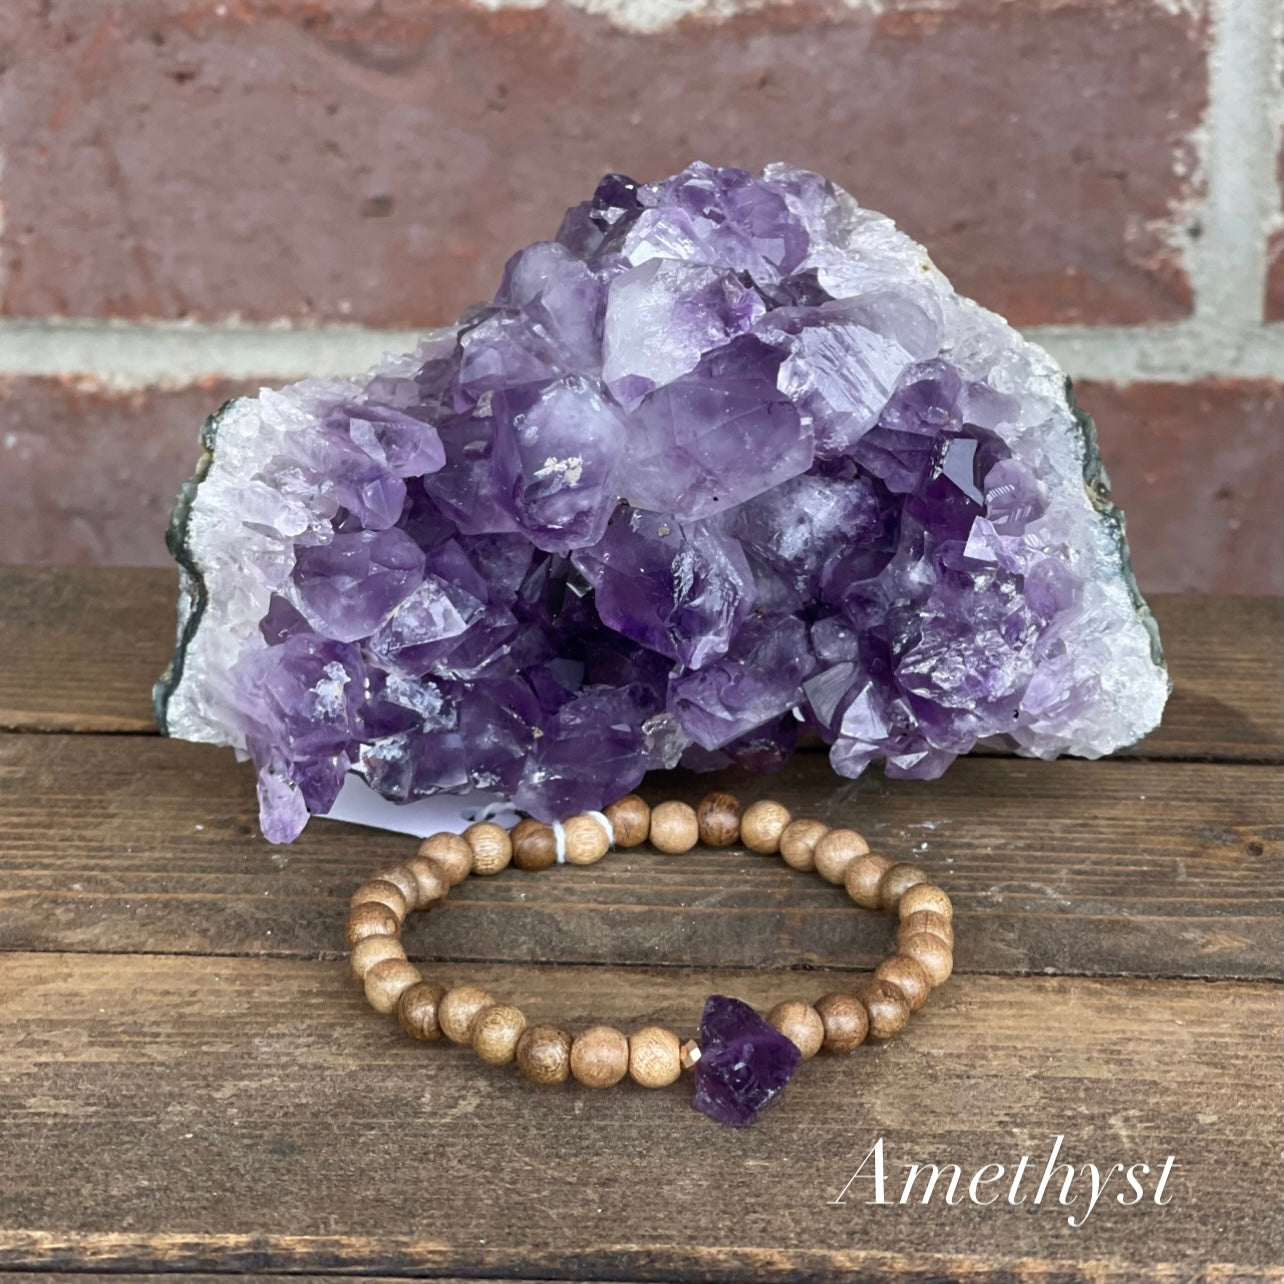 Raw Beauty Bracelets for Littles made with Raw Gemstones - Amethyst